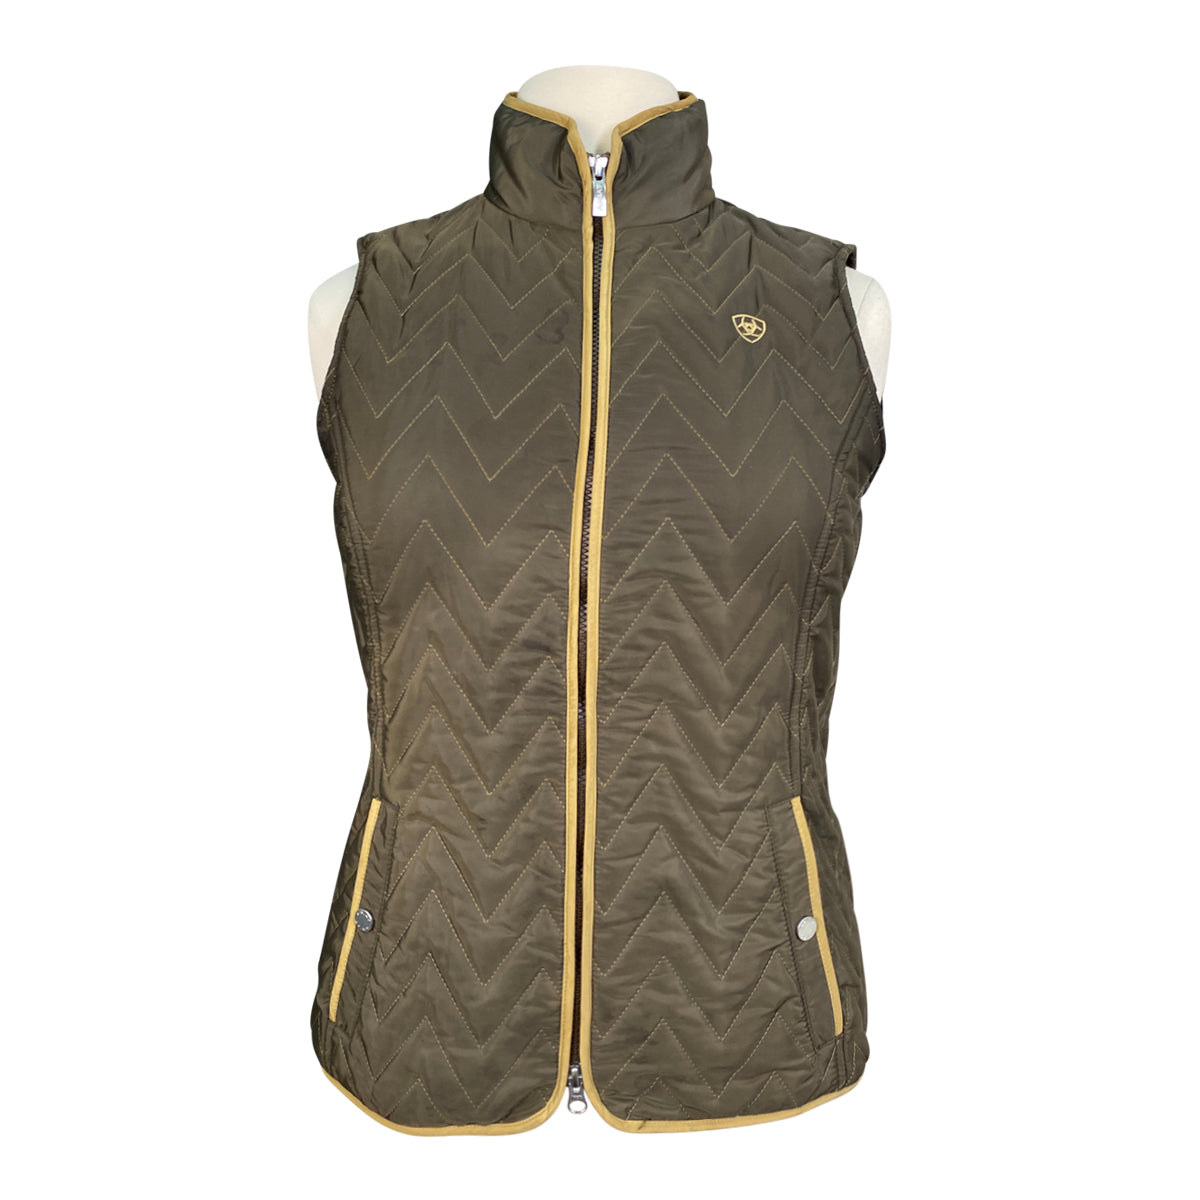 Ariat 'Ashley' Insulated Vest in Canteen